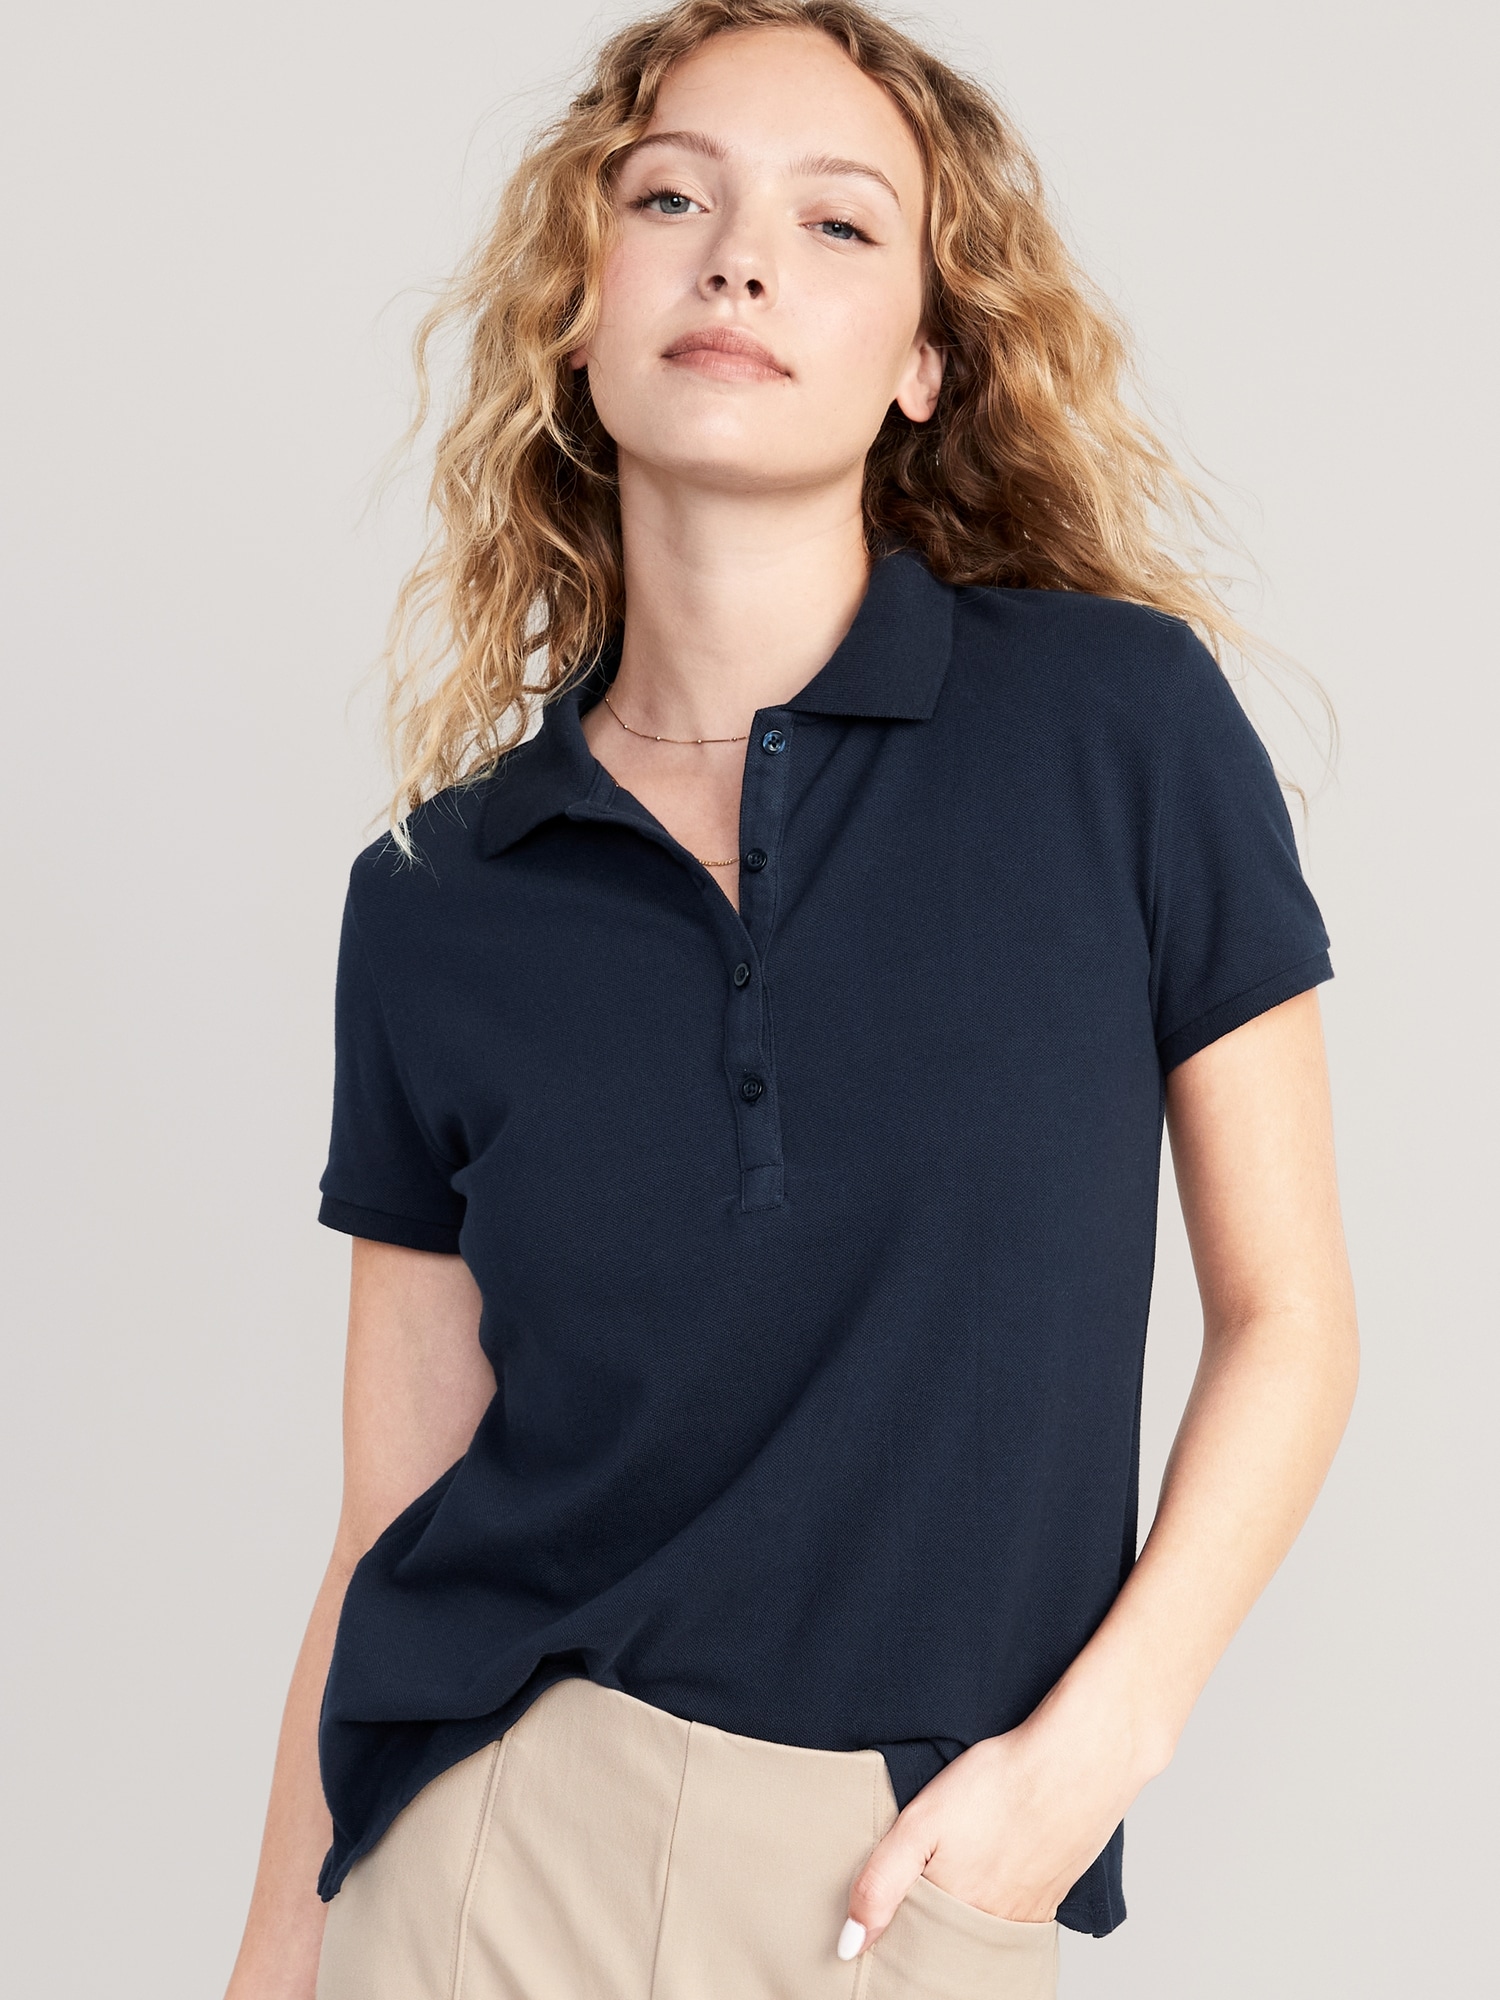 Athletic Women\'s Navy Shirts Old Polo |